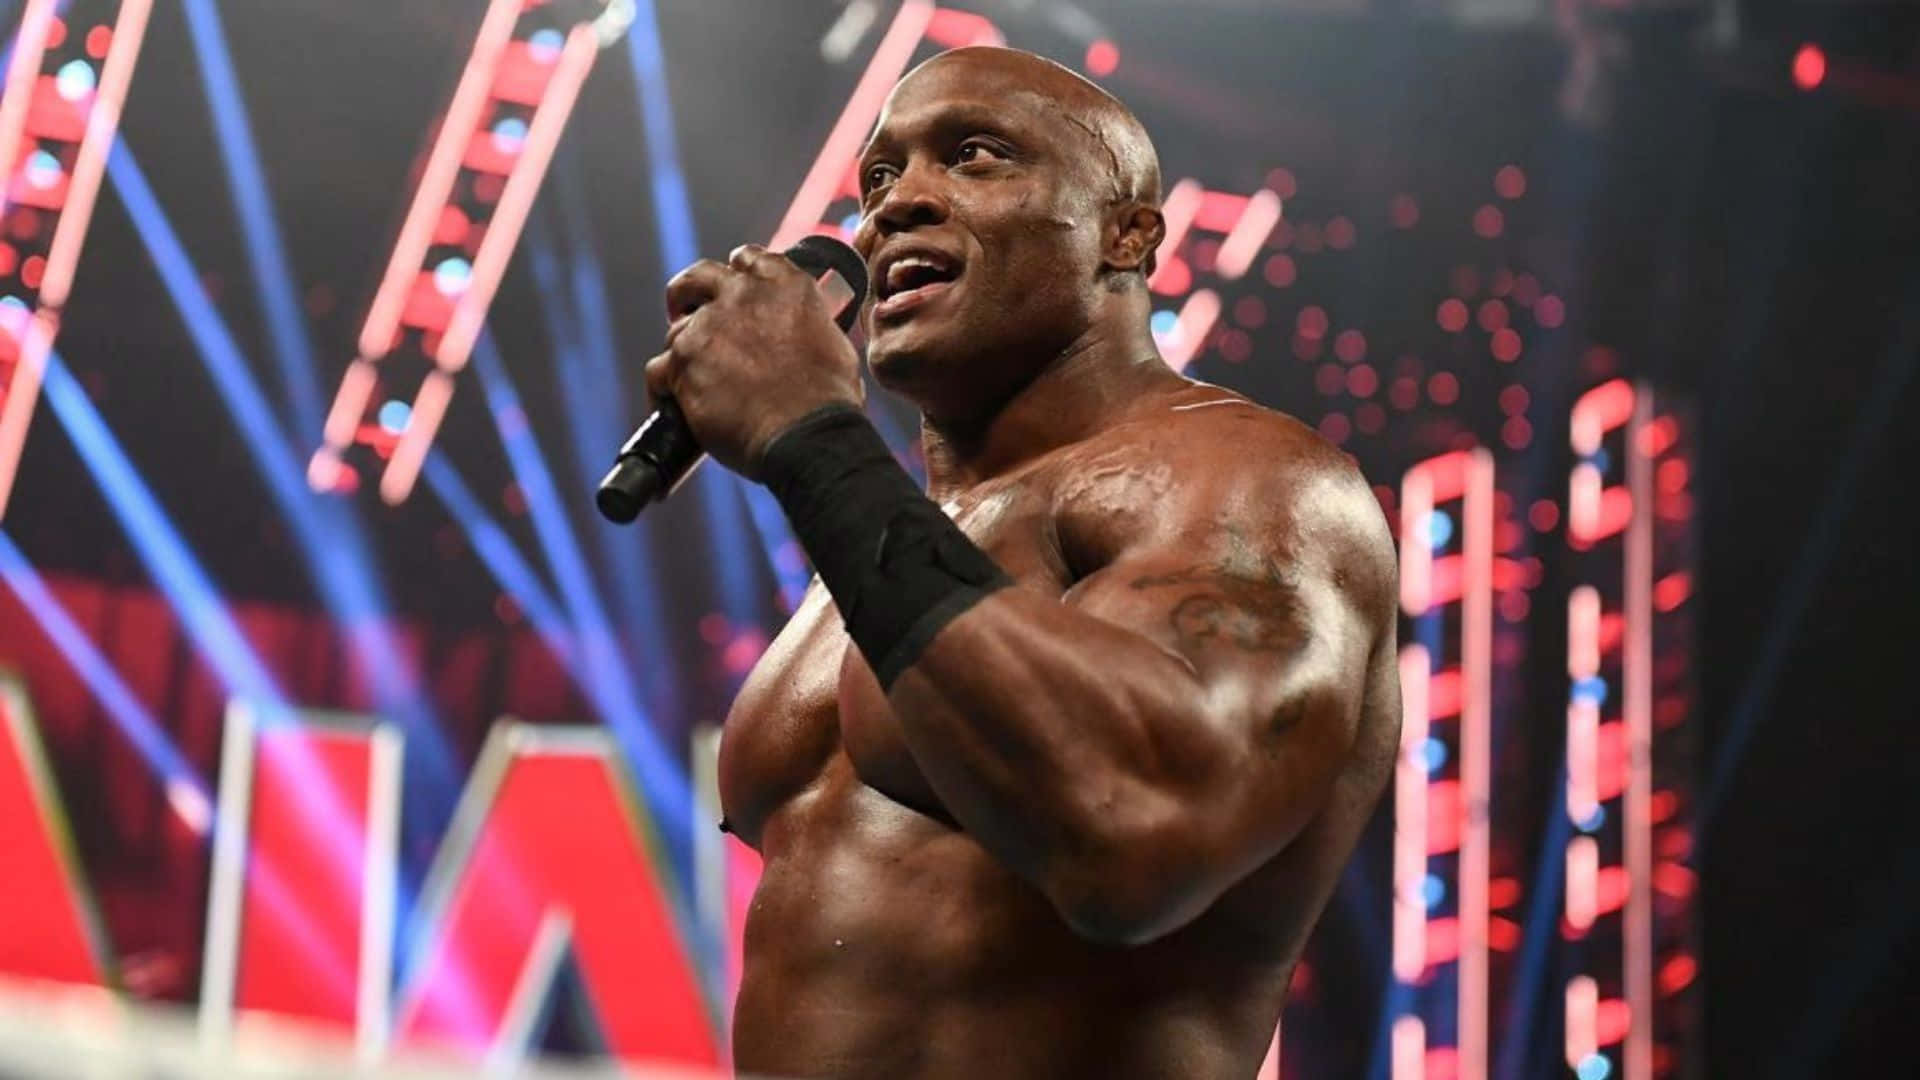 Bobby Lashley Holding A Microphone Wallpaper